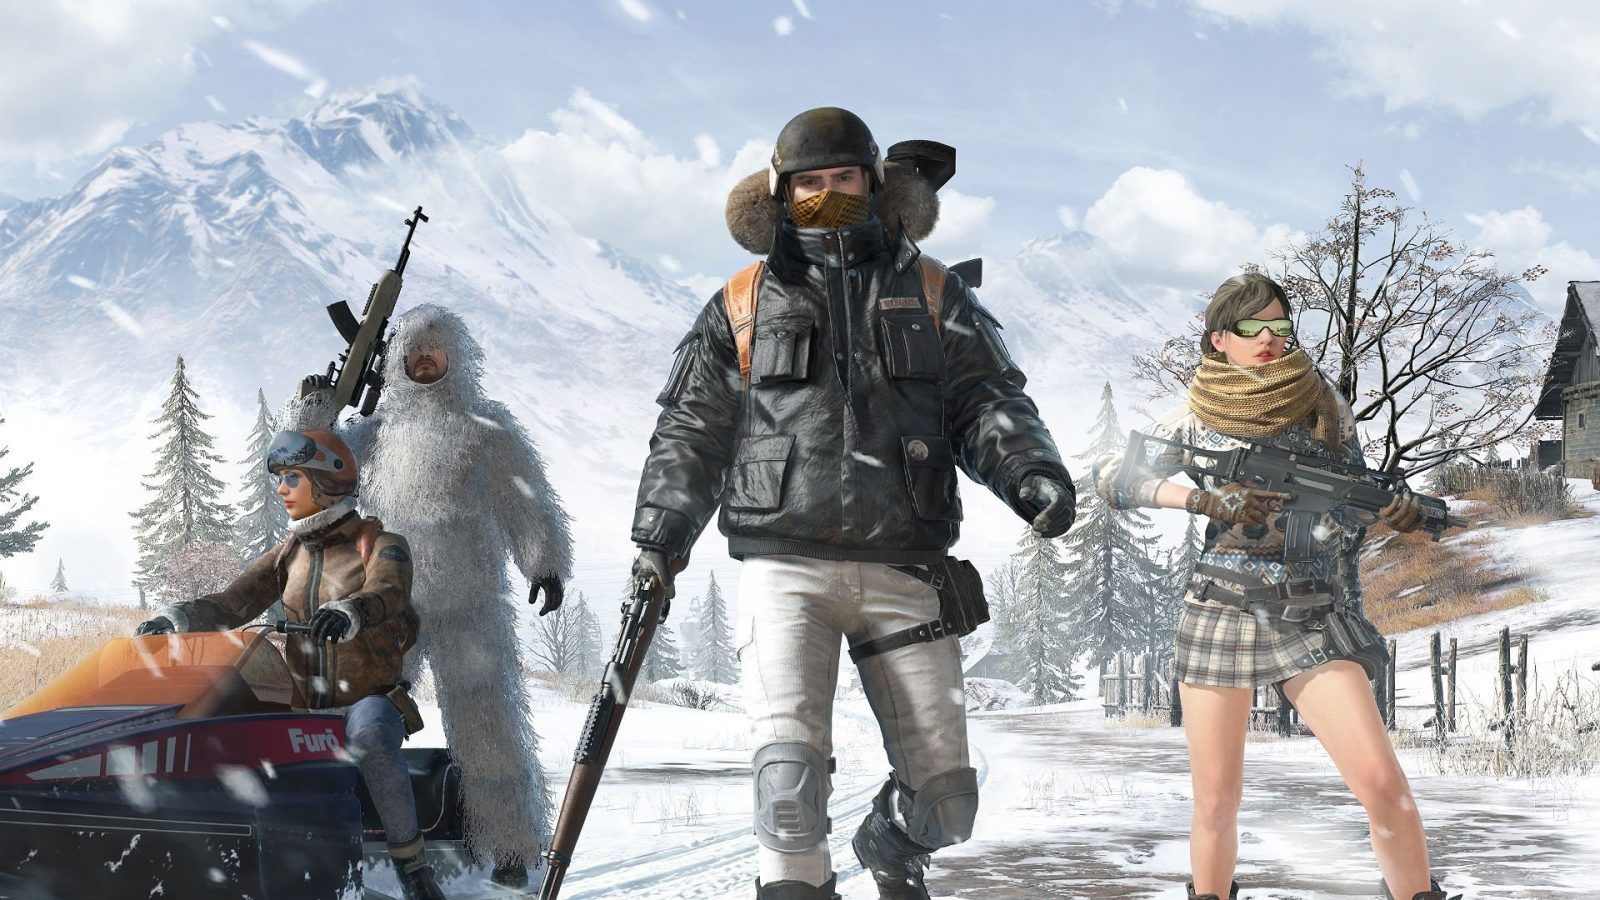 Vikendi Map is coming soon in PUBG Lite on PC